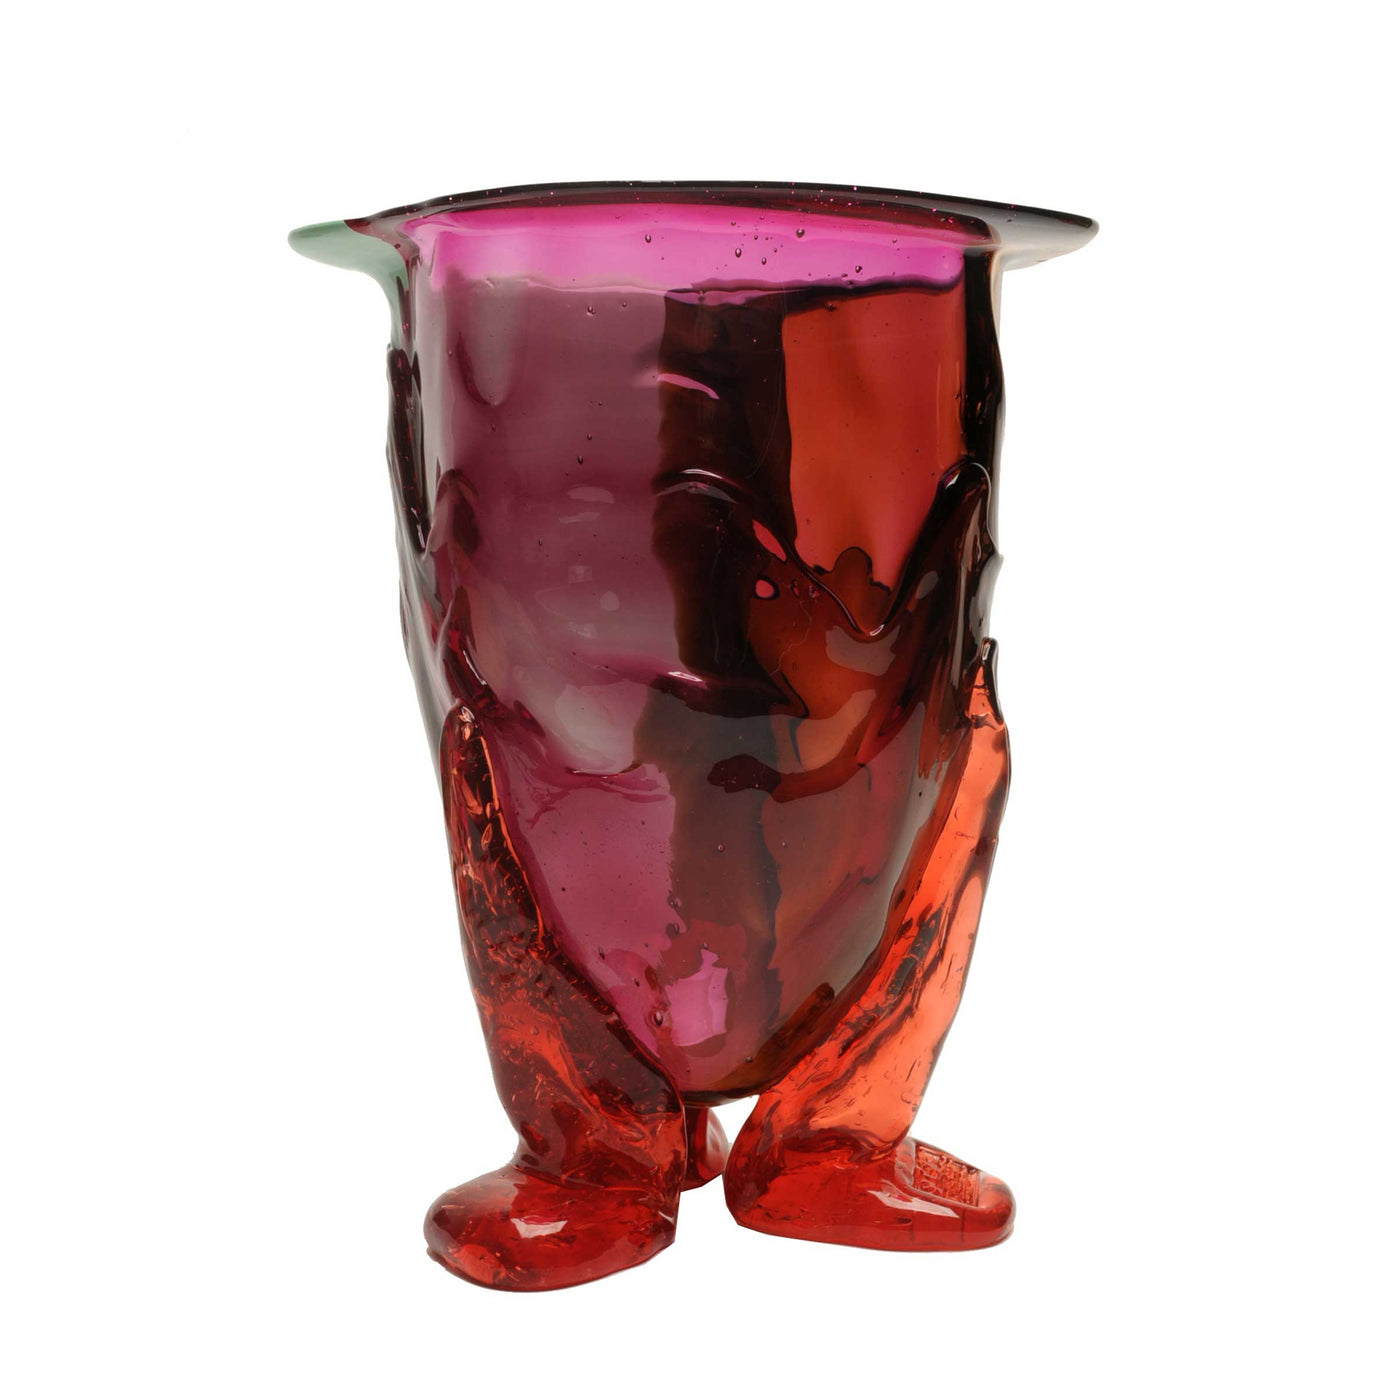 Resin Vase AMAZONIA Matt Mint, Clear Brown, Fuchsia and Pink by Gaetano Pesce for Fish Design 03